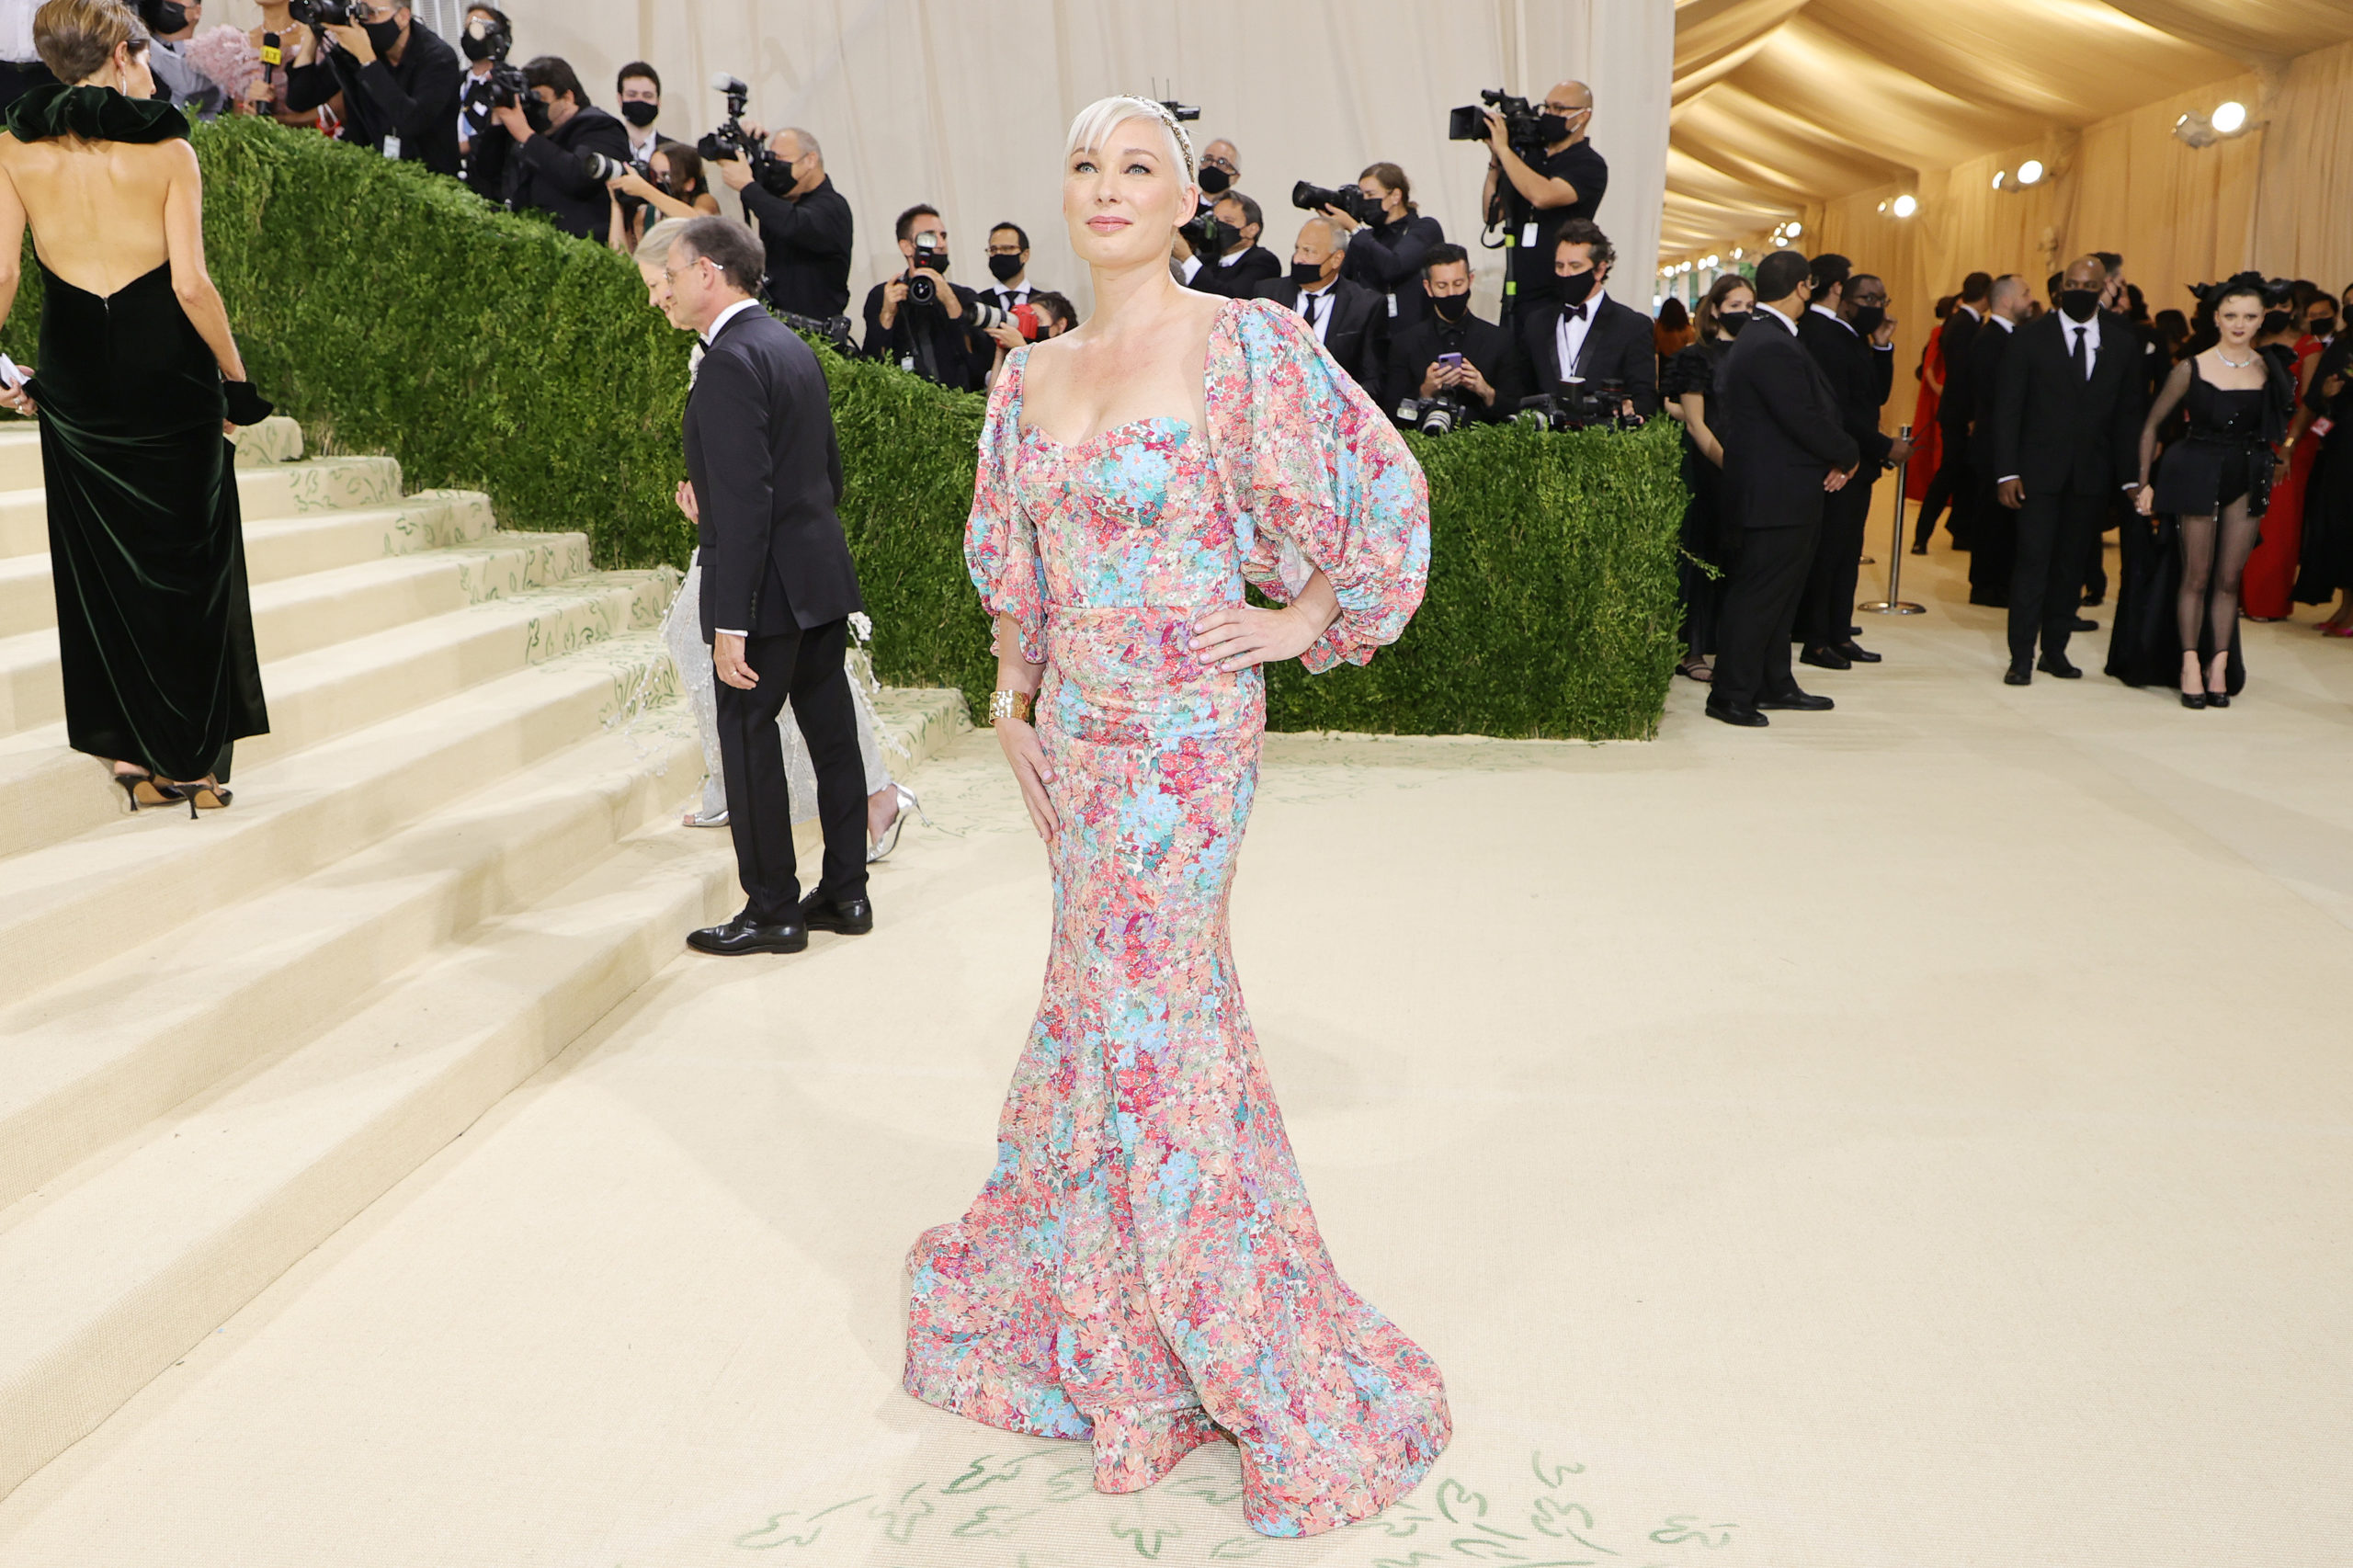 Emma Bengtsson attends The 2021 Met Gala Celebrating In America: A Lexicon Of Fashion at Metropolitan Museum of Art on September 13, 2021 in New York City. (Photo by Mike Coppola/Getty Images)